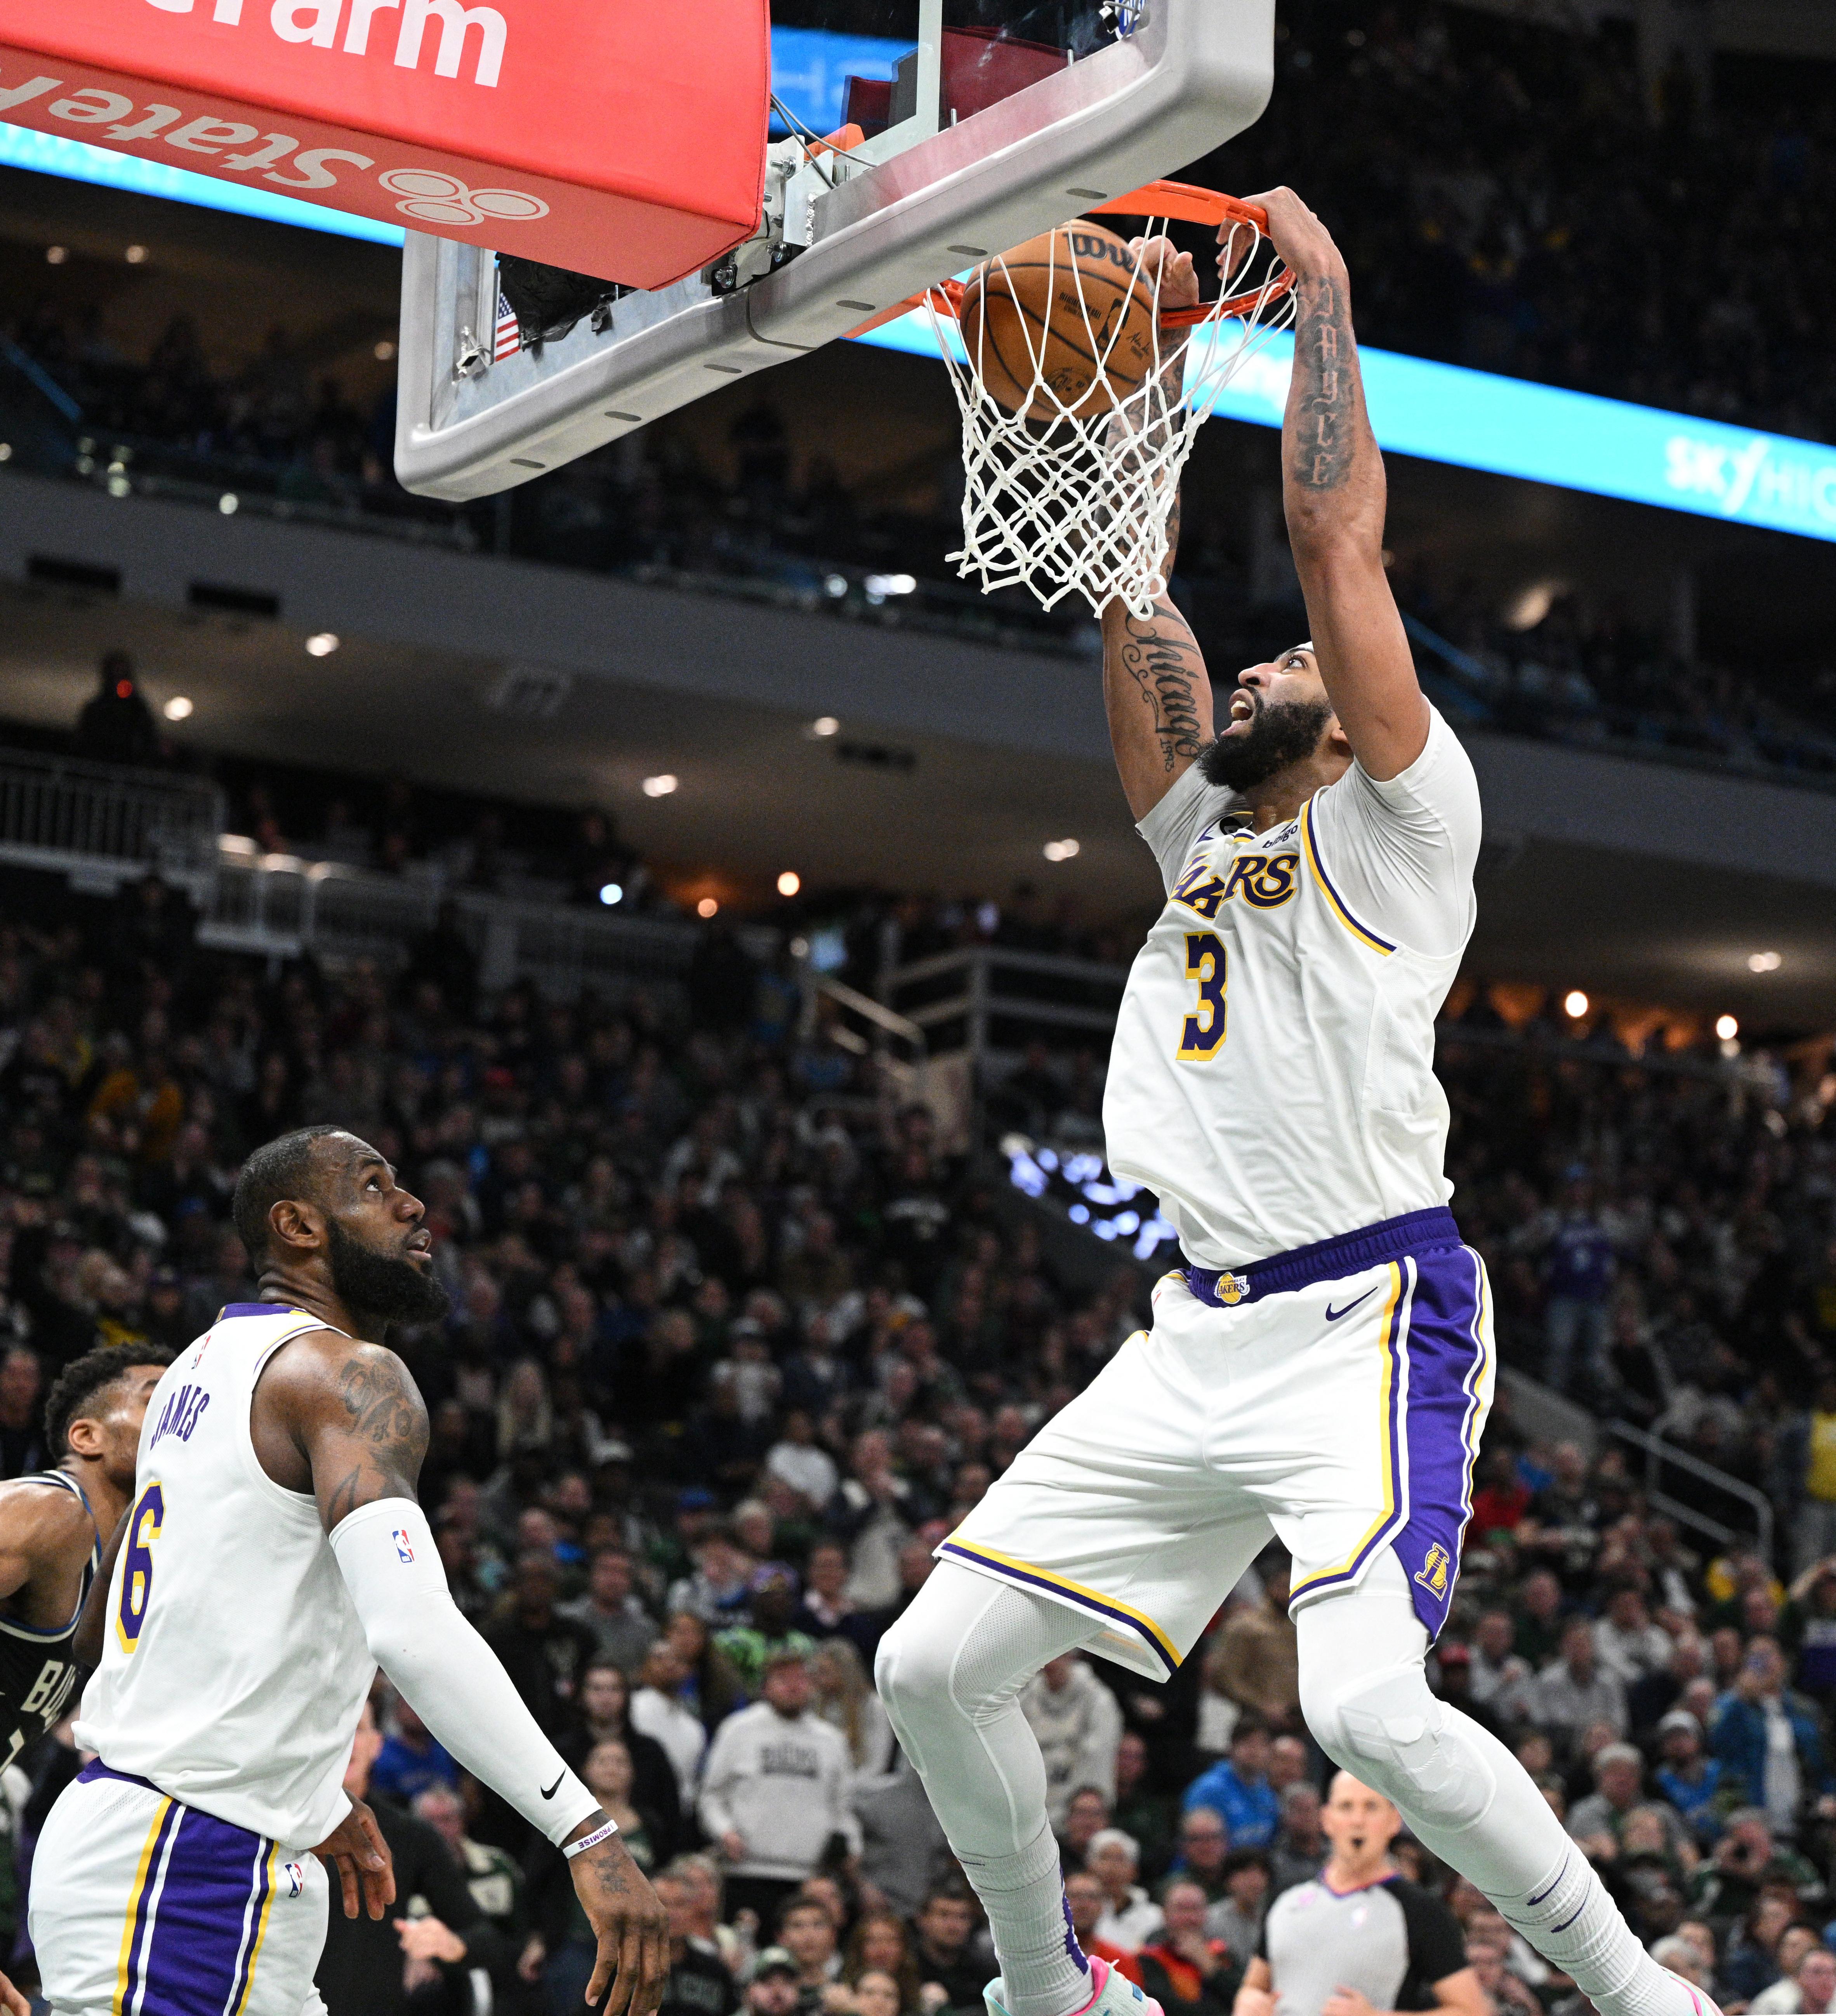 NBA roundup: Anthony Davis erupts for 55 points in Lakers' win | Reuters